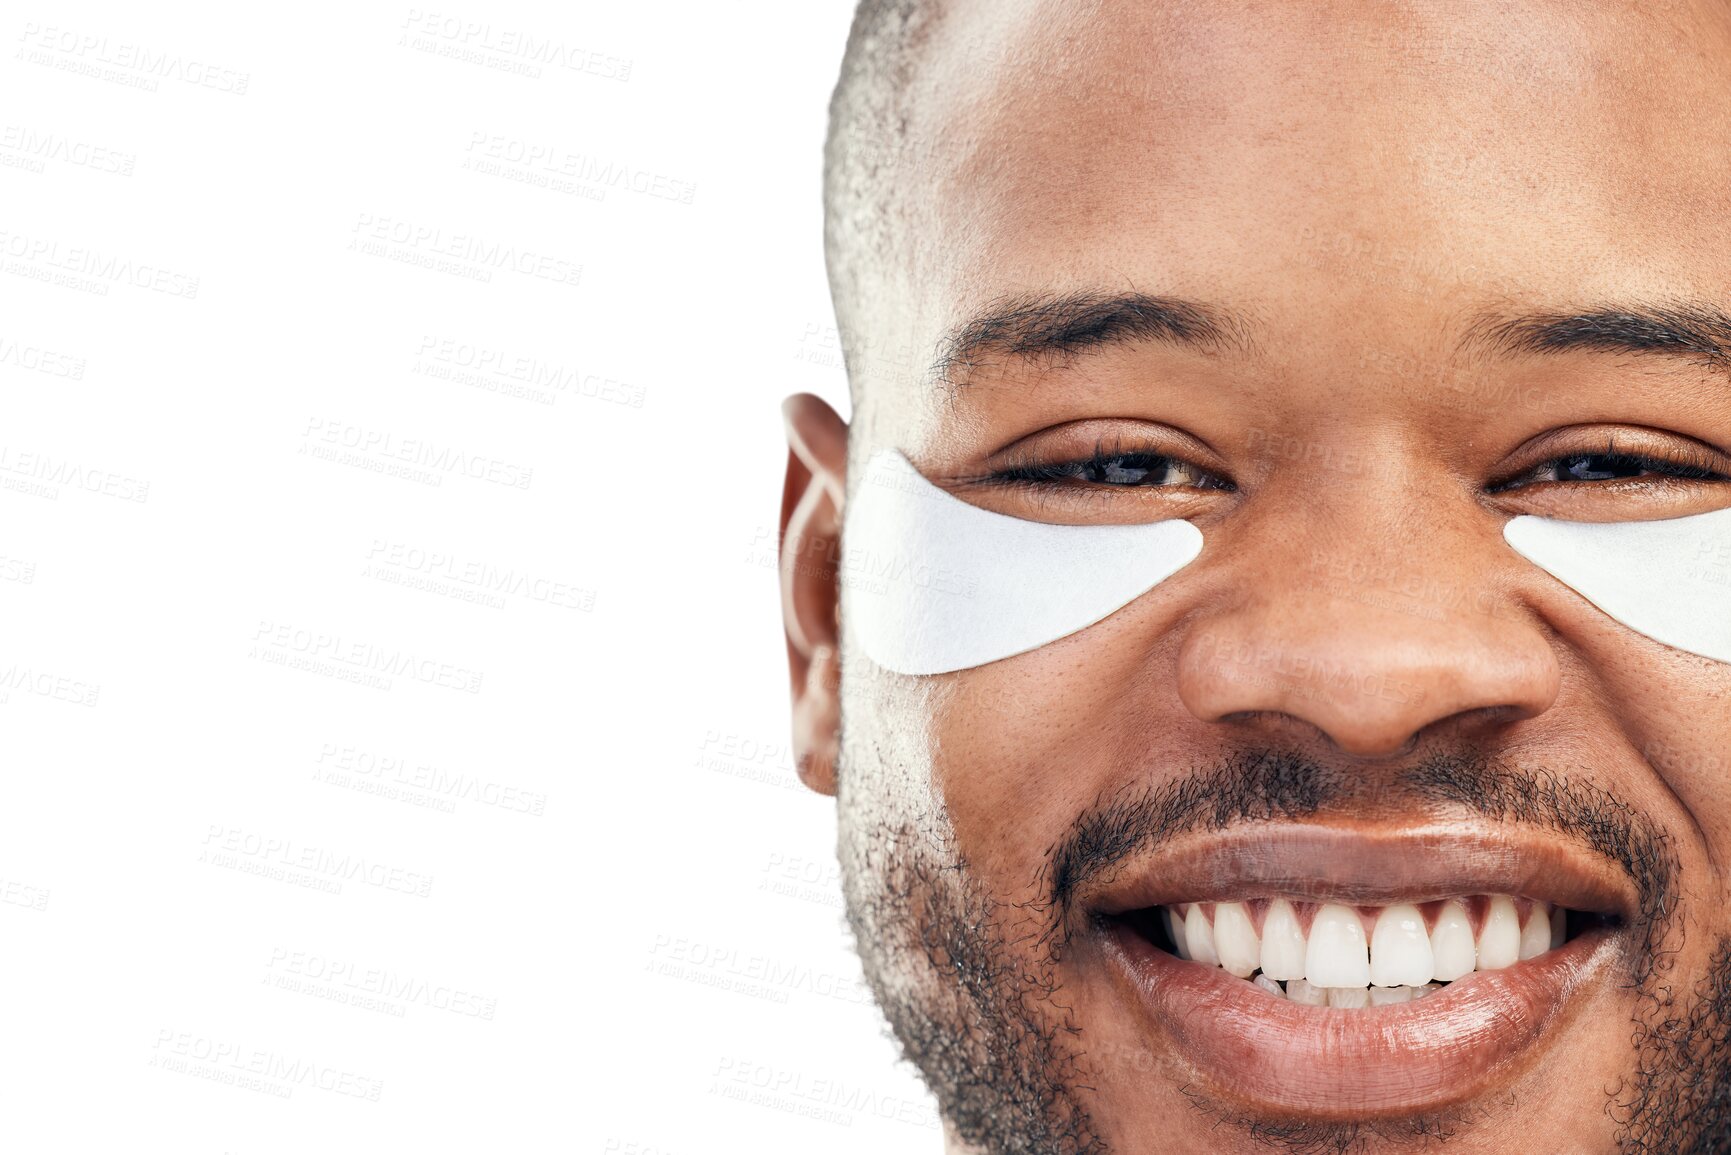 Buy stock photo Portrait, closeup and black man with eye patch,  dermatology and luxury isolated against a transparent background. Face, male person and model with png, skincare and self care with natural beauty